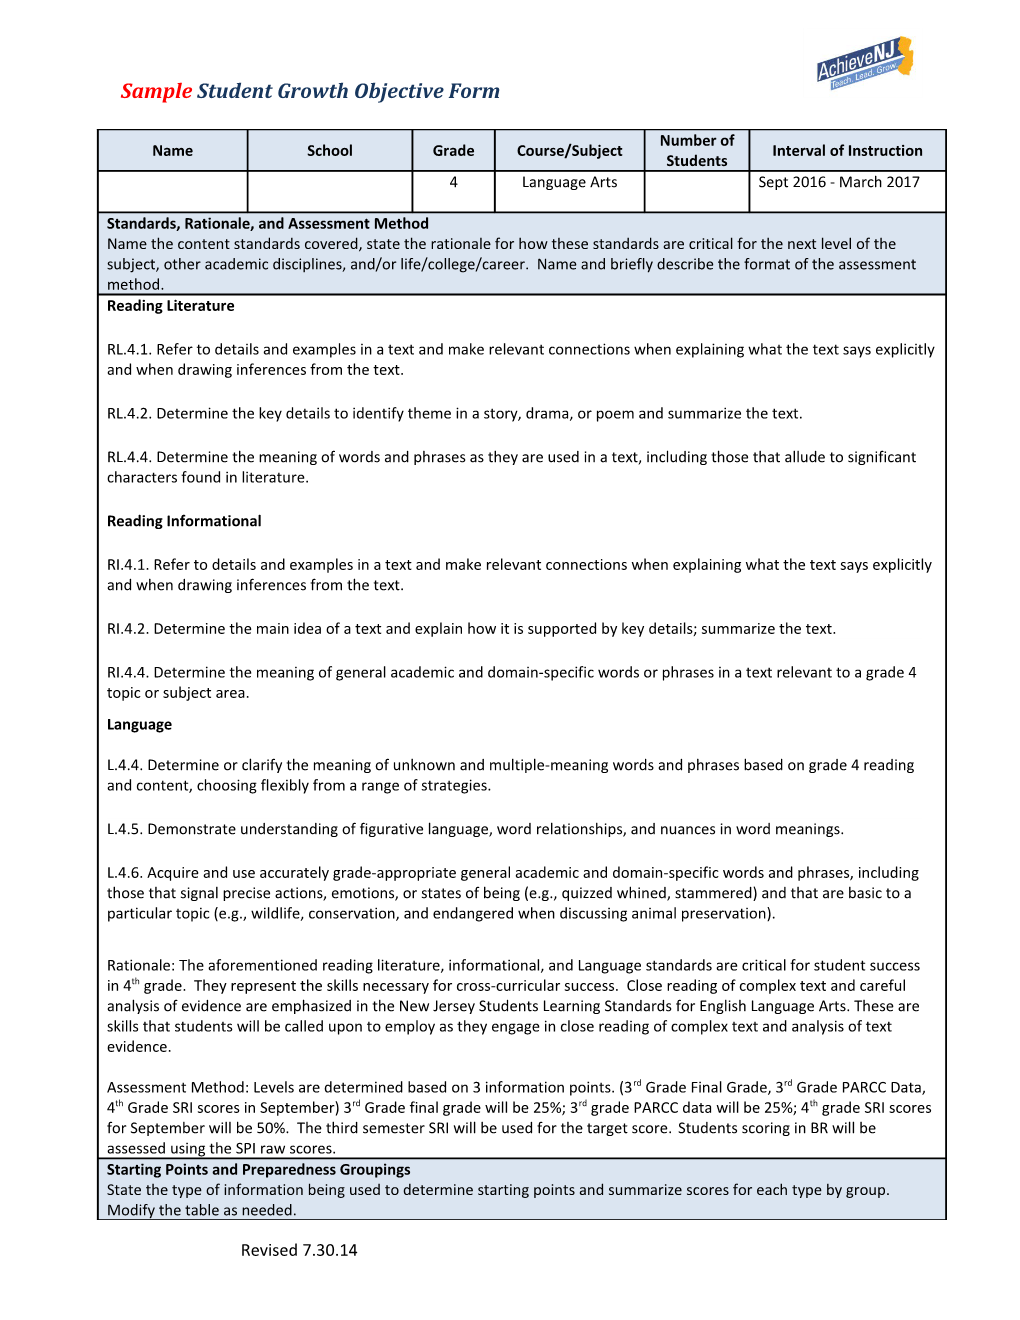 Sample Student Growth Objective Form